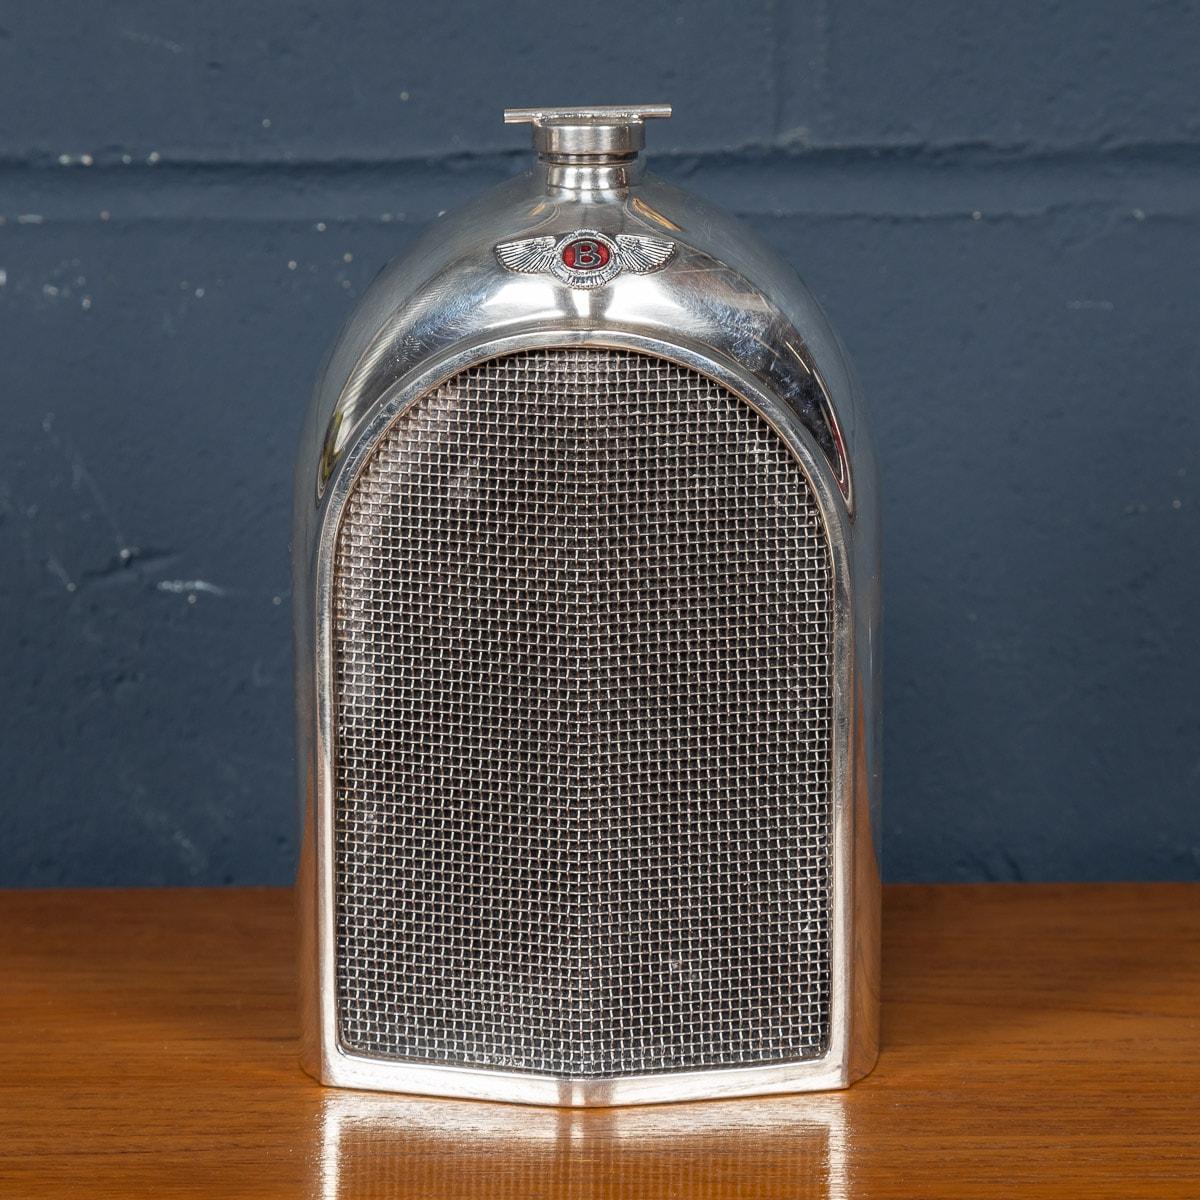 A vintage Bentley chrome radiator grille decanter made by Classic Stable Ltd of Worthing with wire mesh grille, bearing the red enamel radiator badge. Made in the 1970s, the decanter is equipped with a “slot” in the casing at the rear allowing